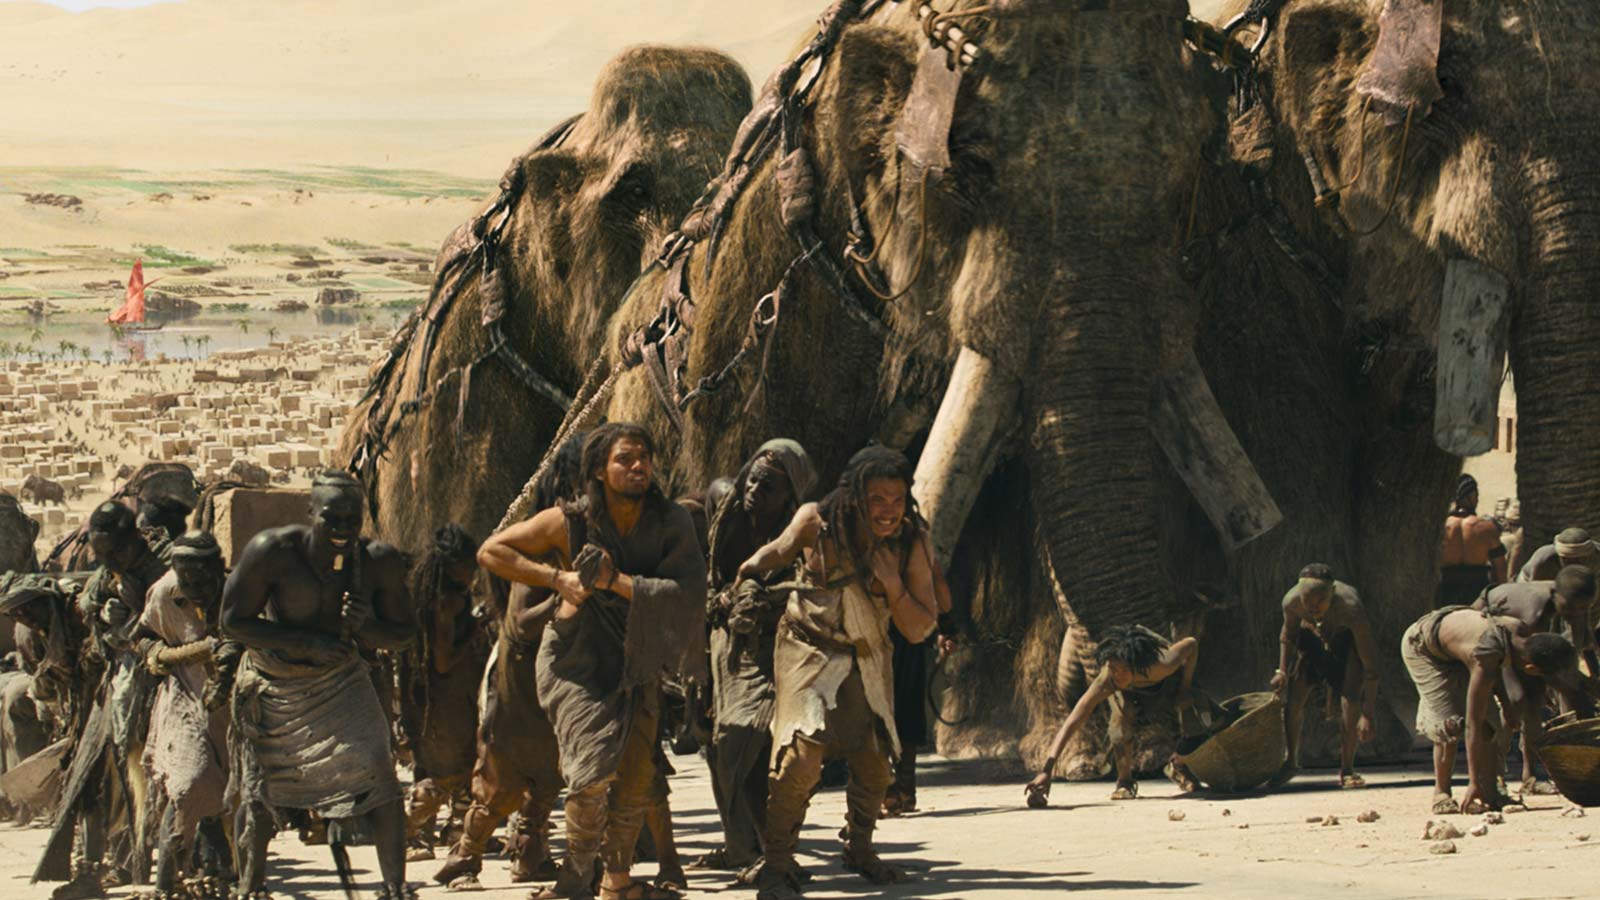 Nice Wallpapers 10,000 Bc 1600x900px - 10000 Bc Movie - HD Wallpaper 